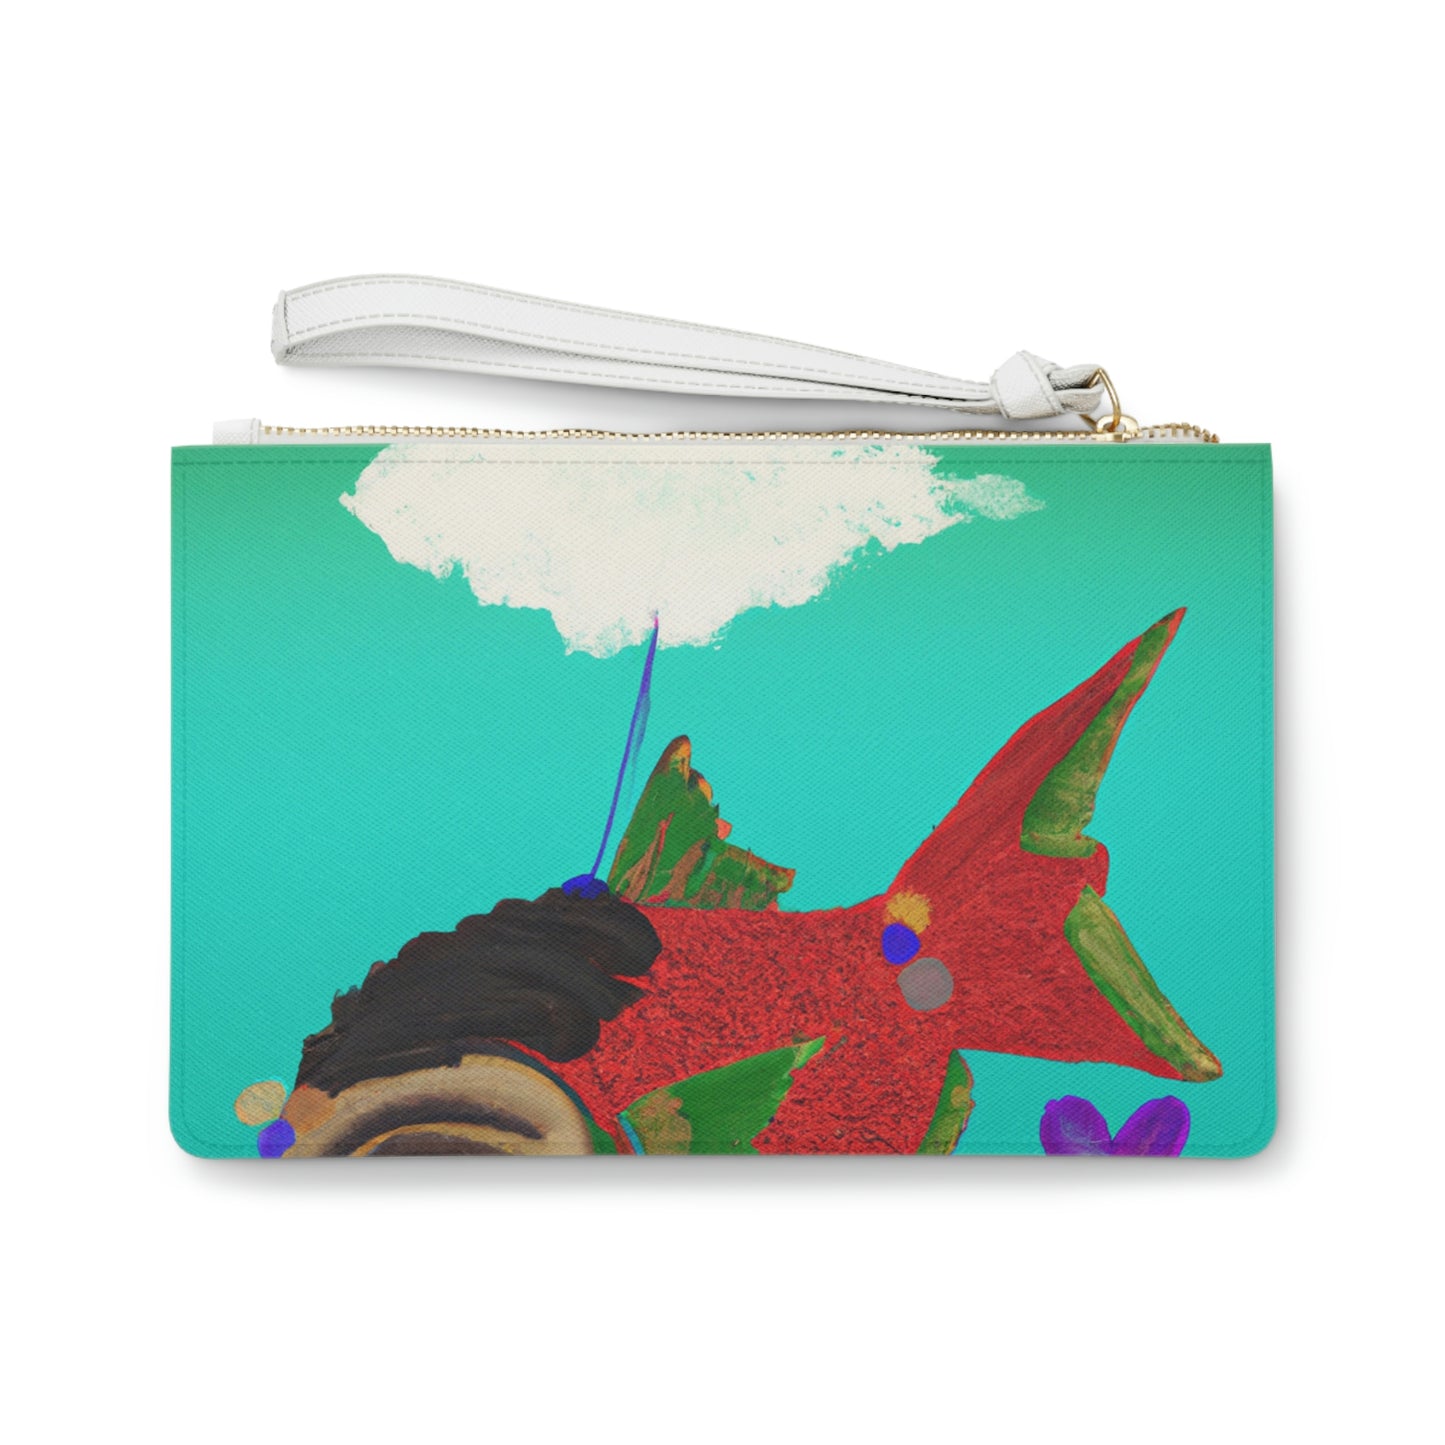 The Mysterious Flying Fish and Its Enigmatic Secret - The Alien Clutch Bag